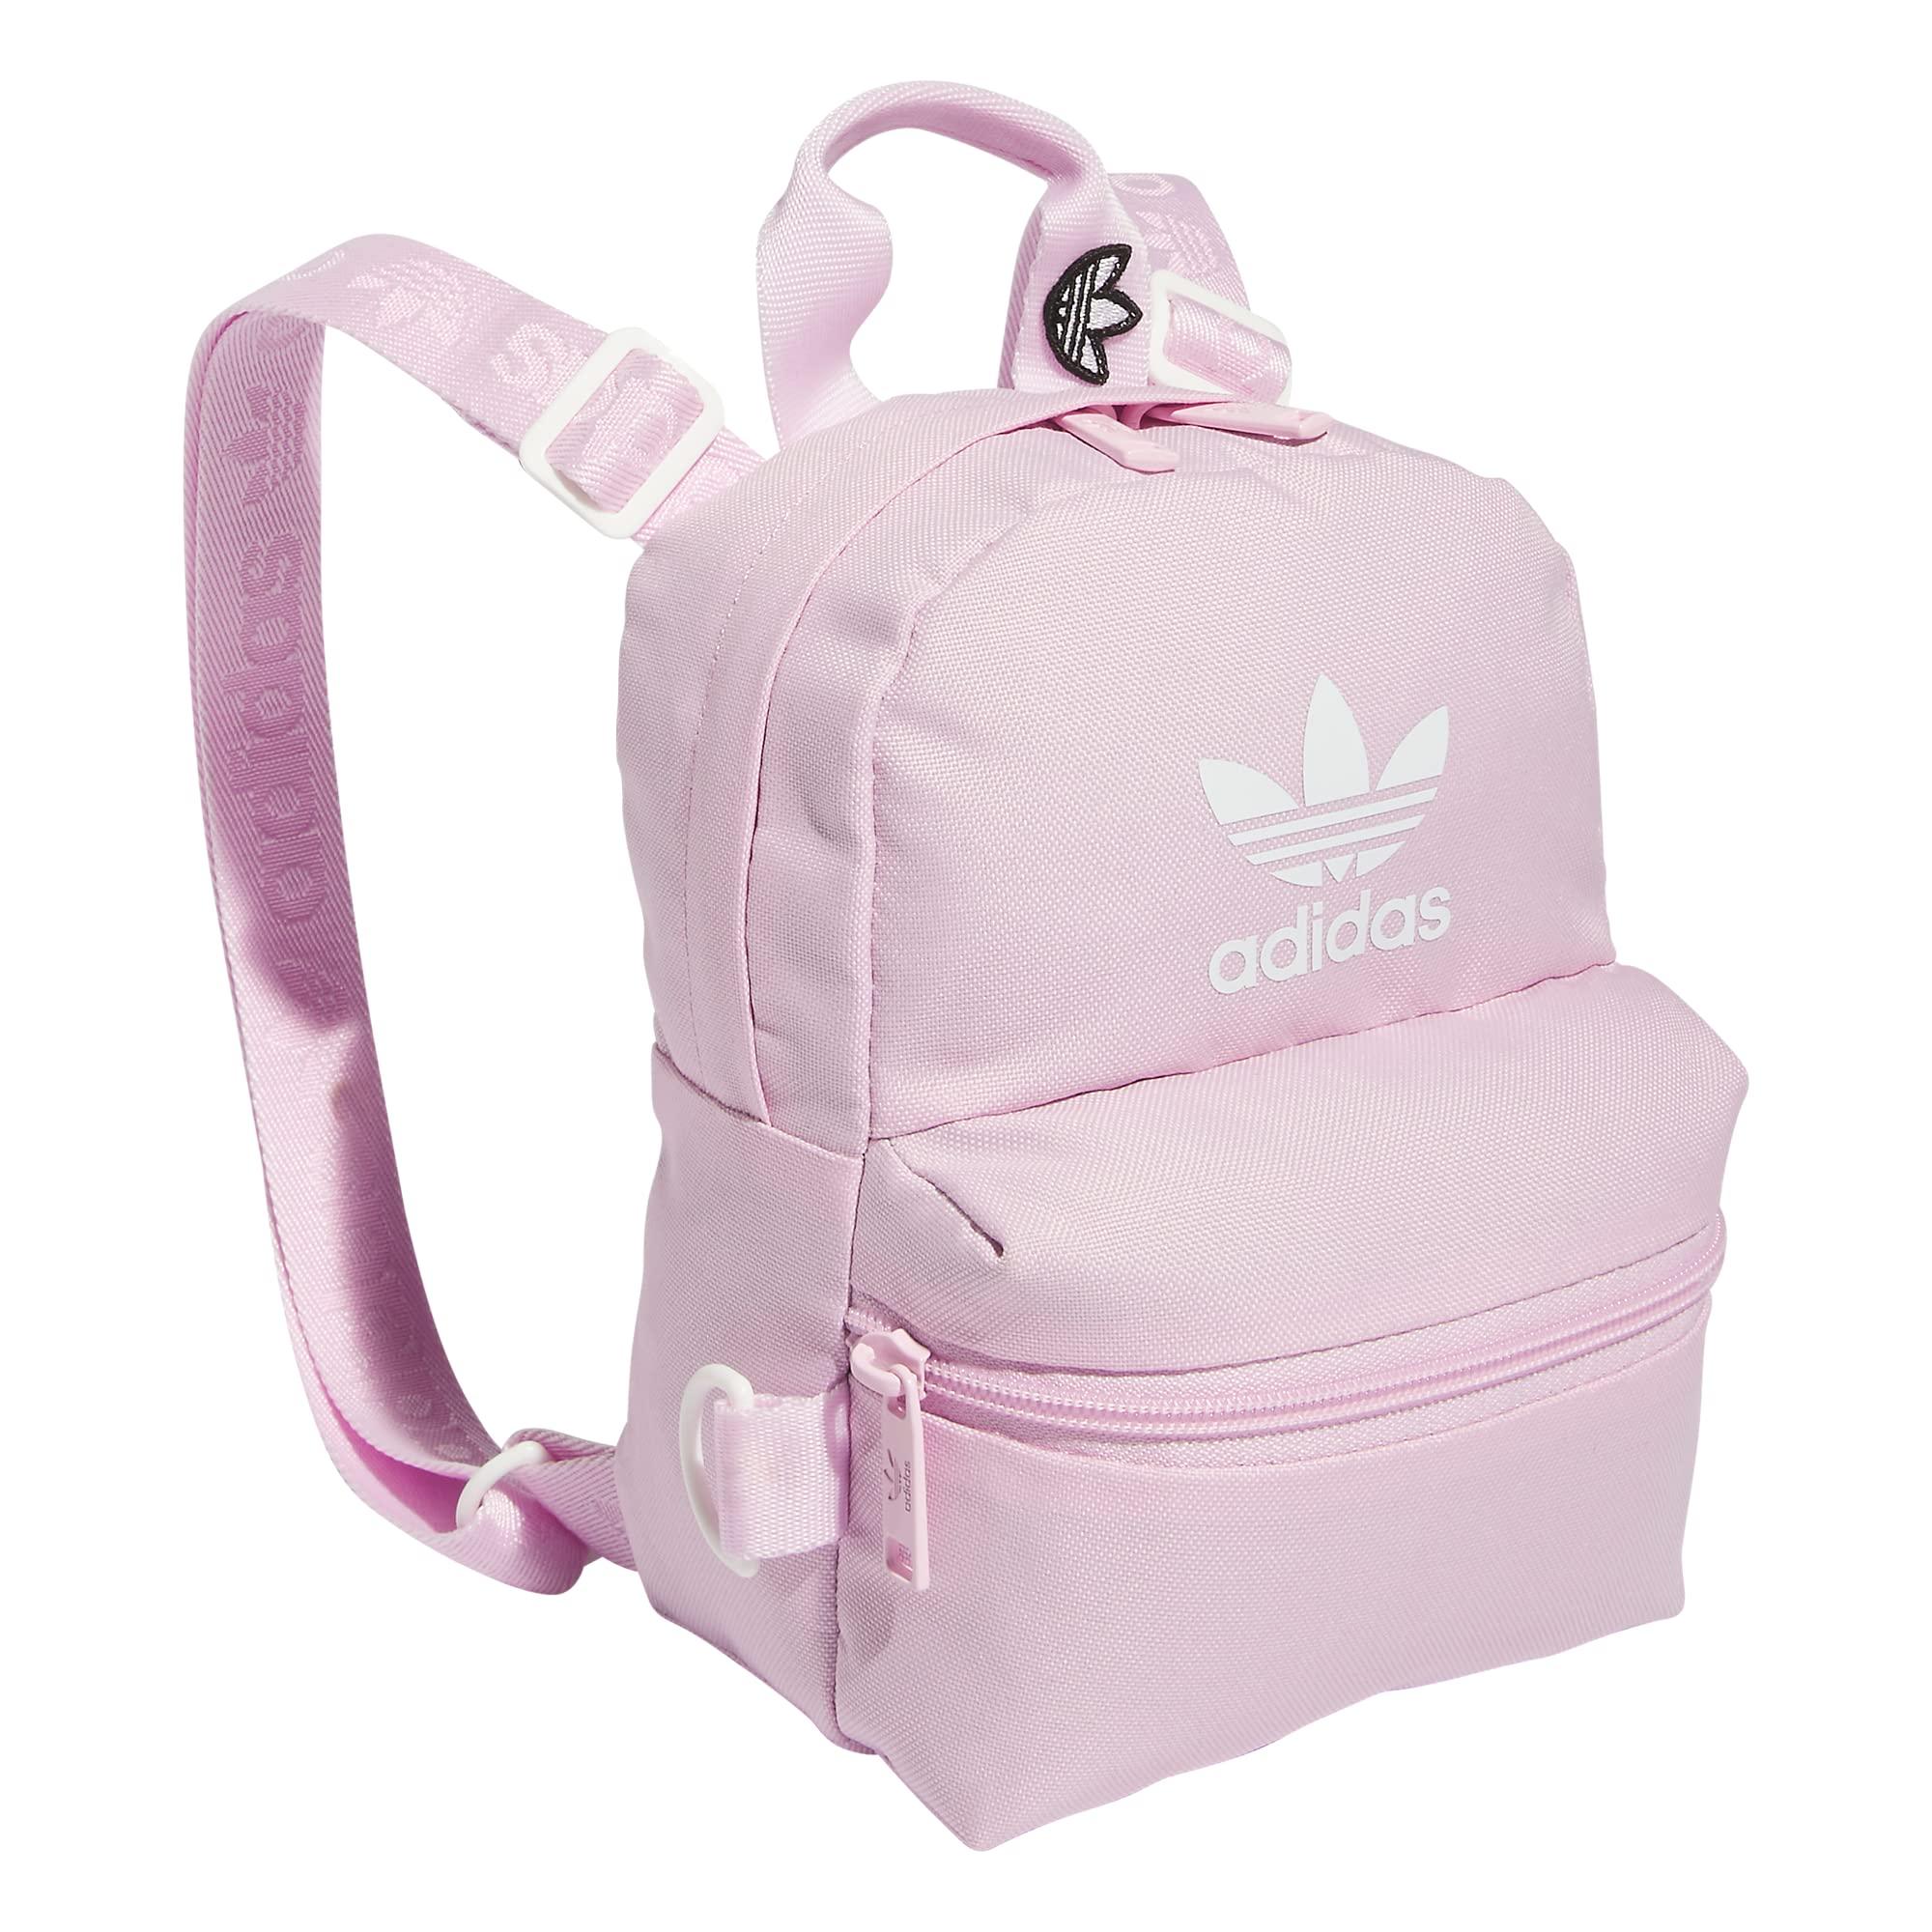 adidas Originals Linear Mini Backpack Small Travel Bag One Size Mint Green  | eBay